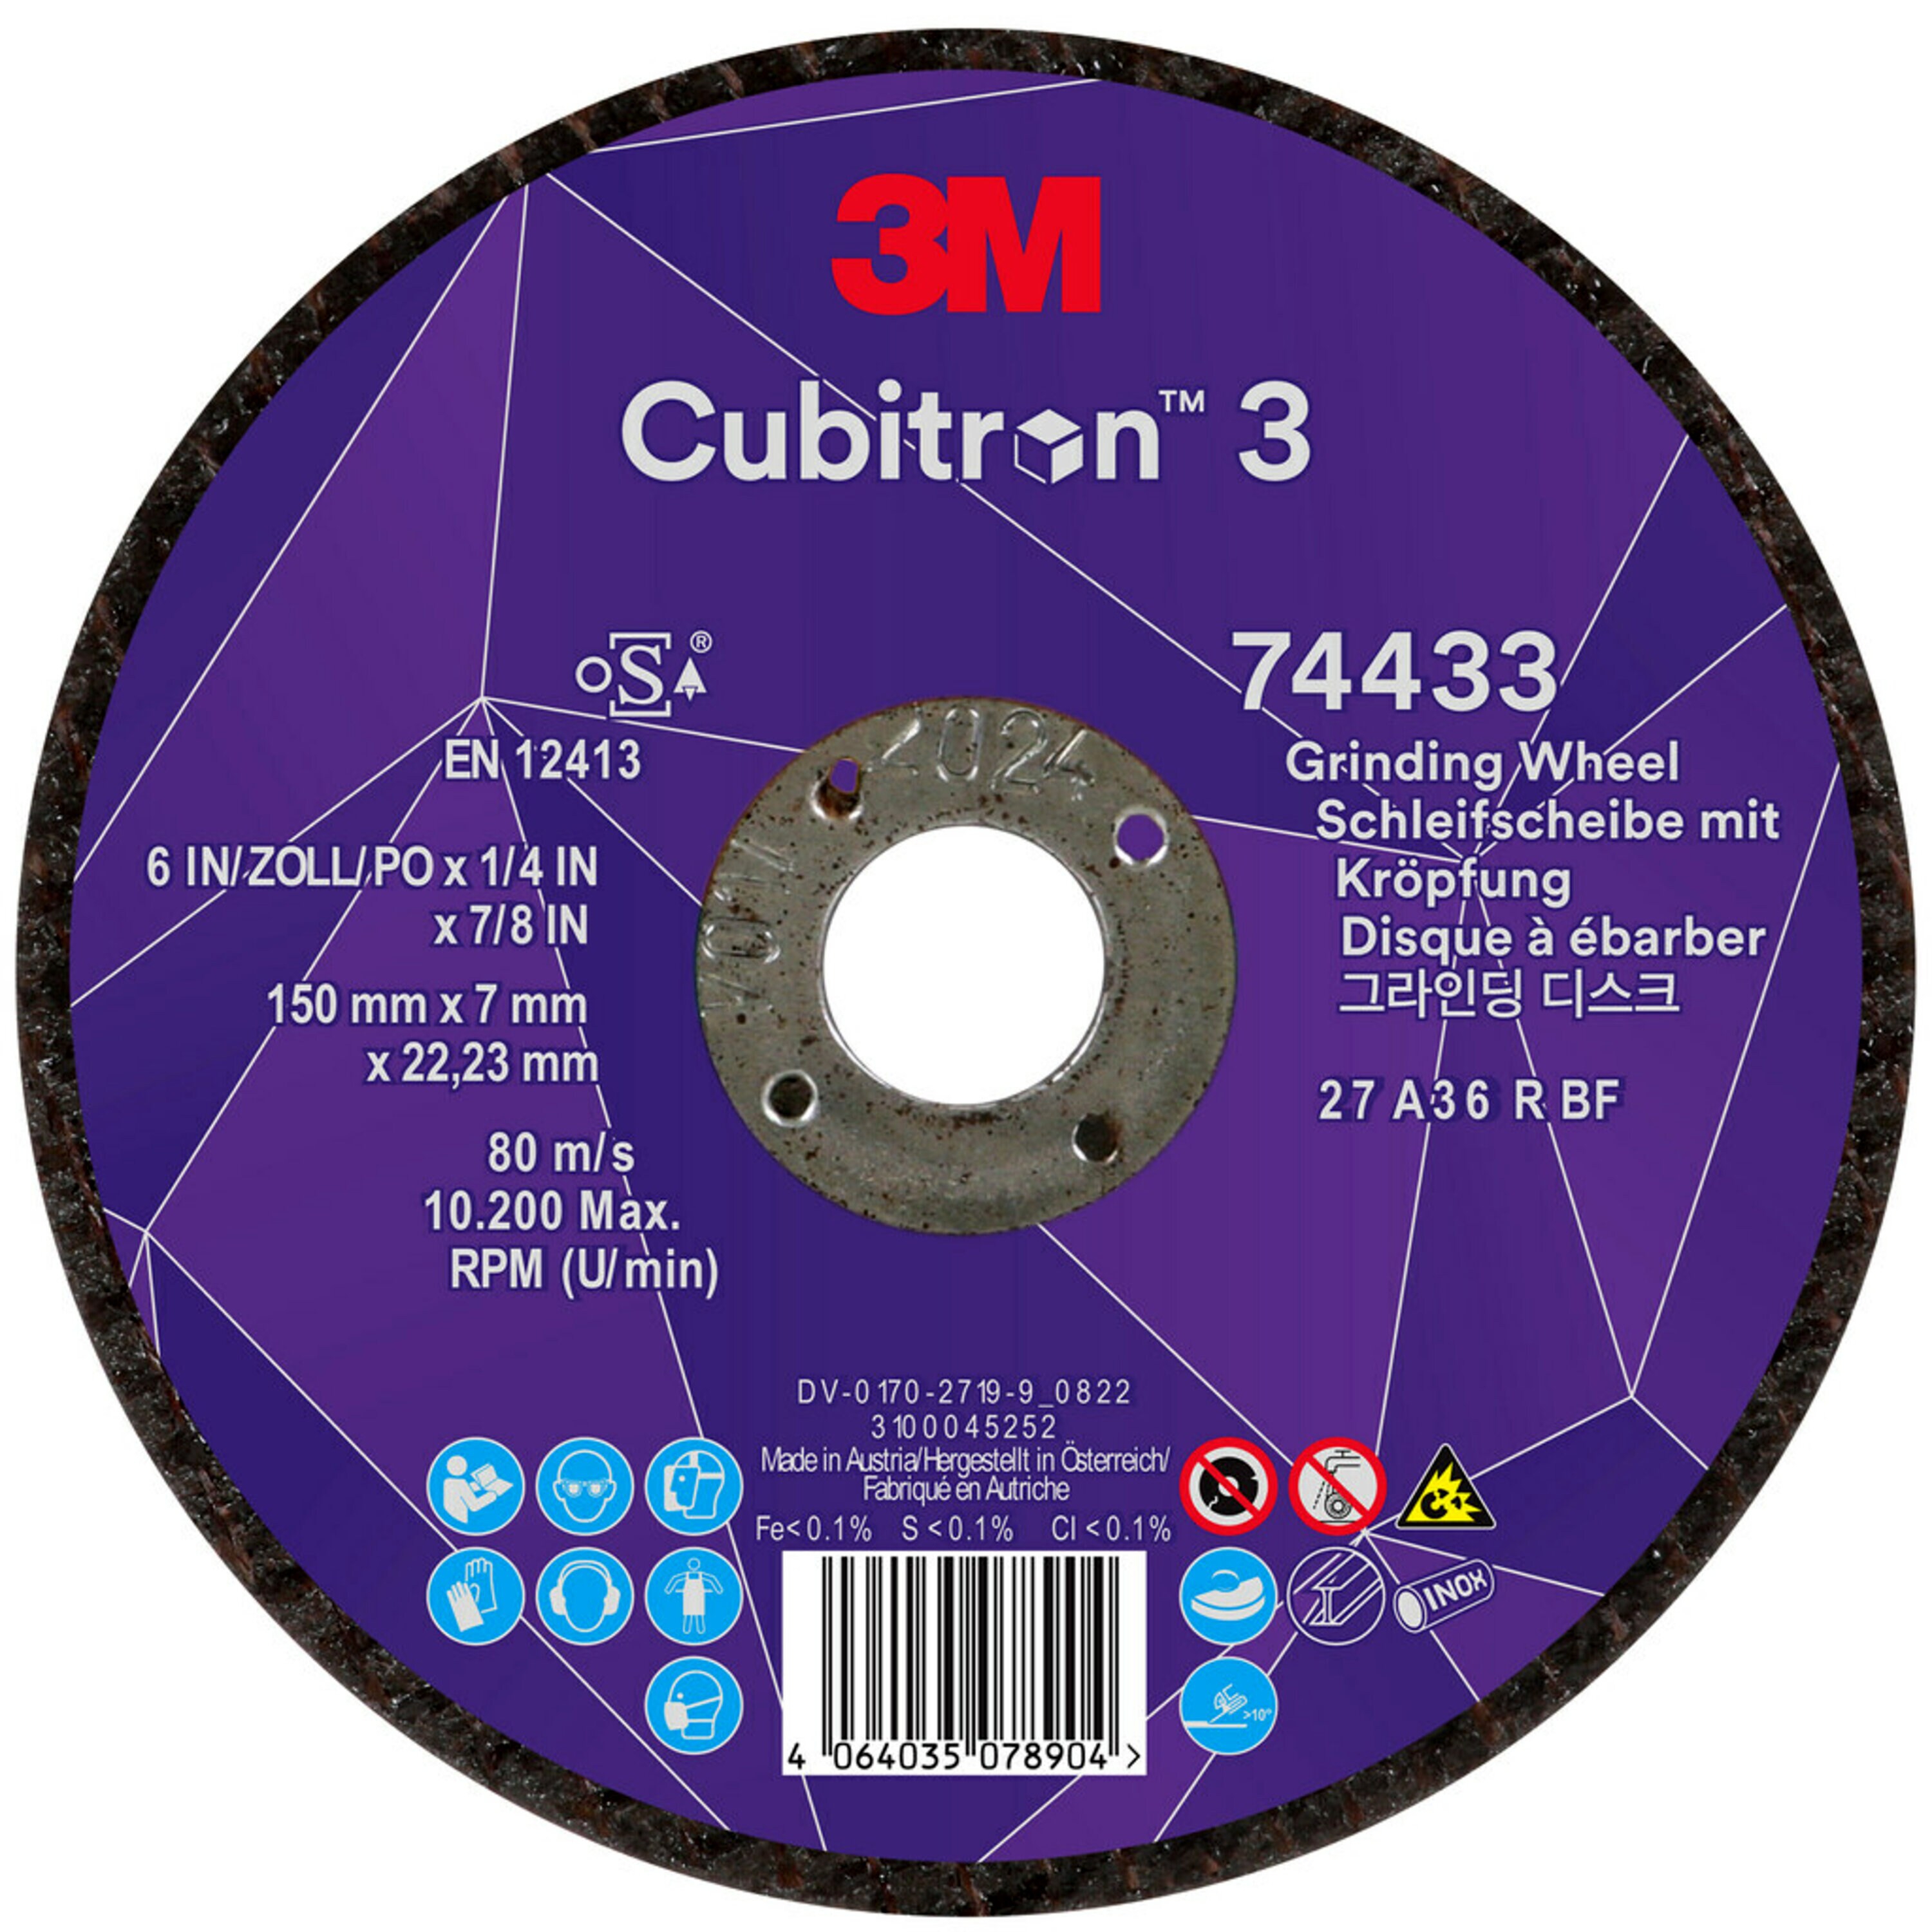 3M Cubitron 3 grinding disc, 150 mm, 7.0 mm, 22.23 mm, 36+, type 27, especially for gouging # 74433